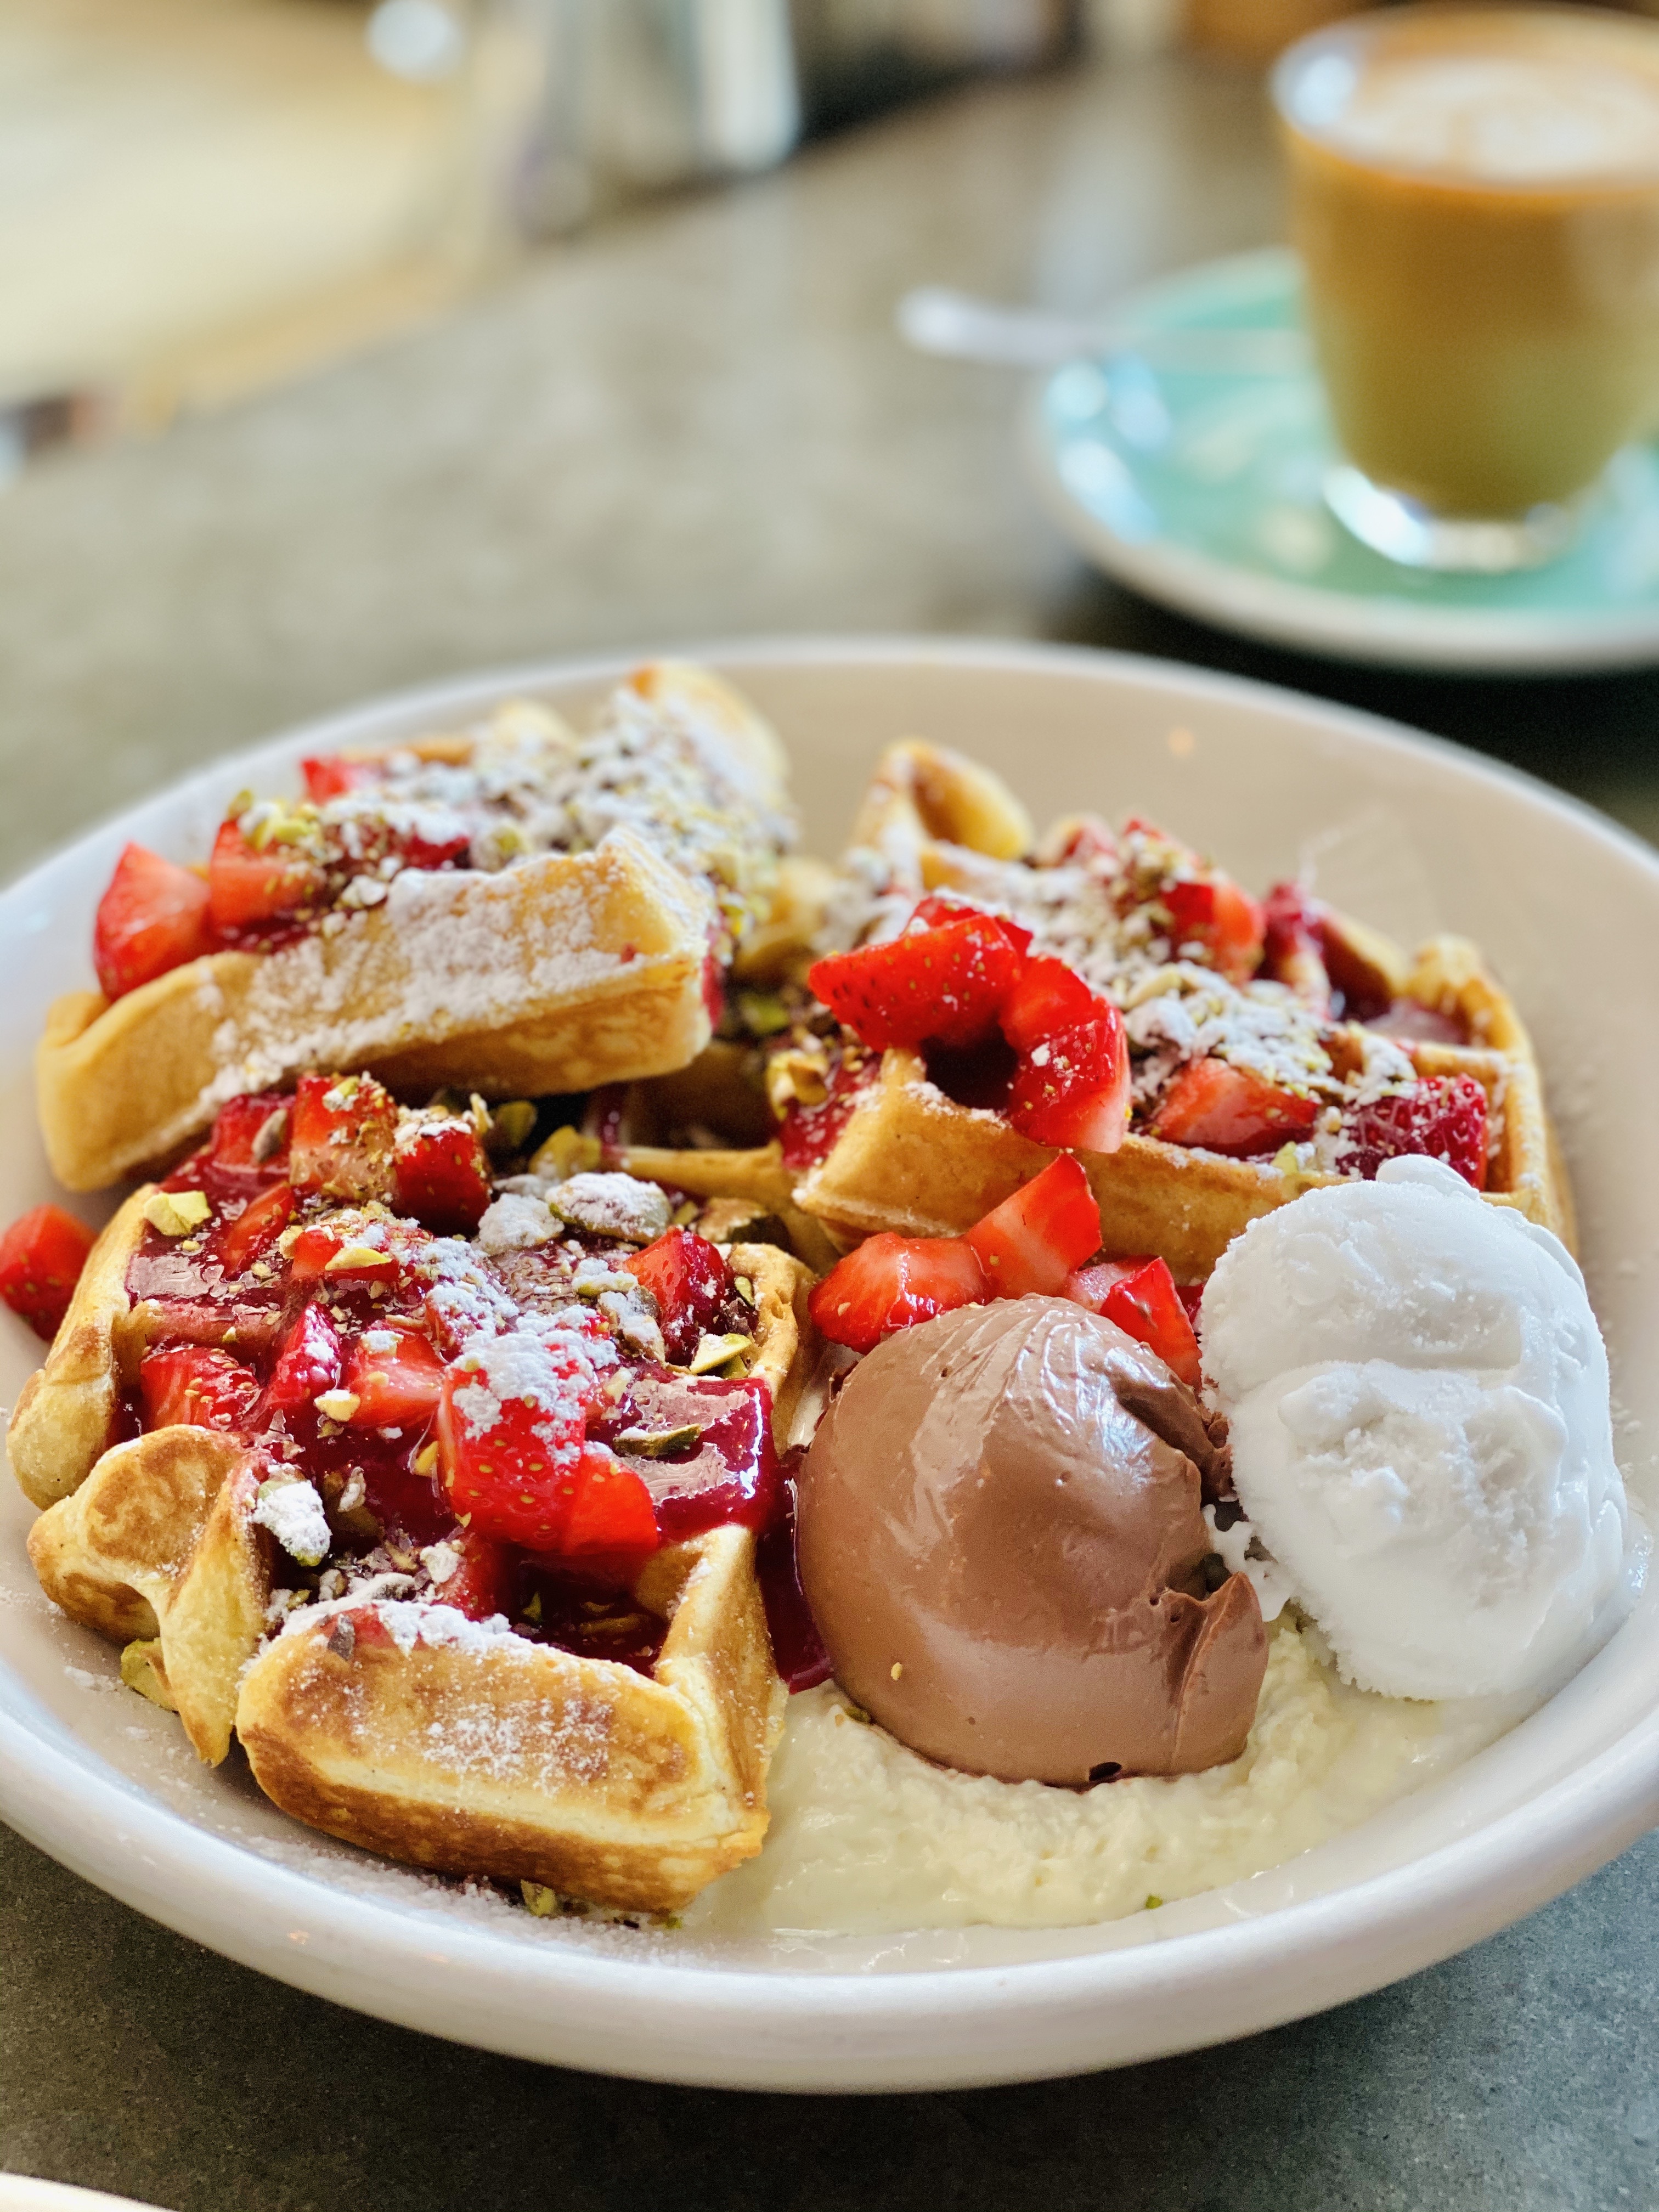 Eat out in Auckland at Odettes Eatery and try some delicious waffles - Giddy Guest